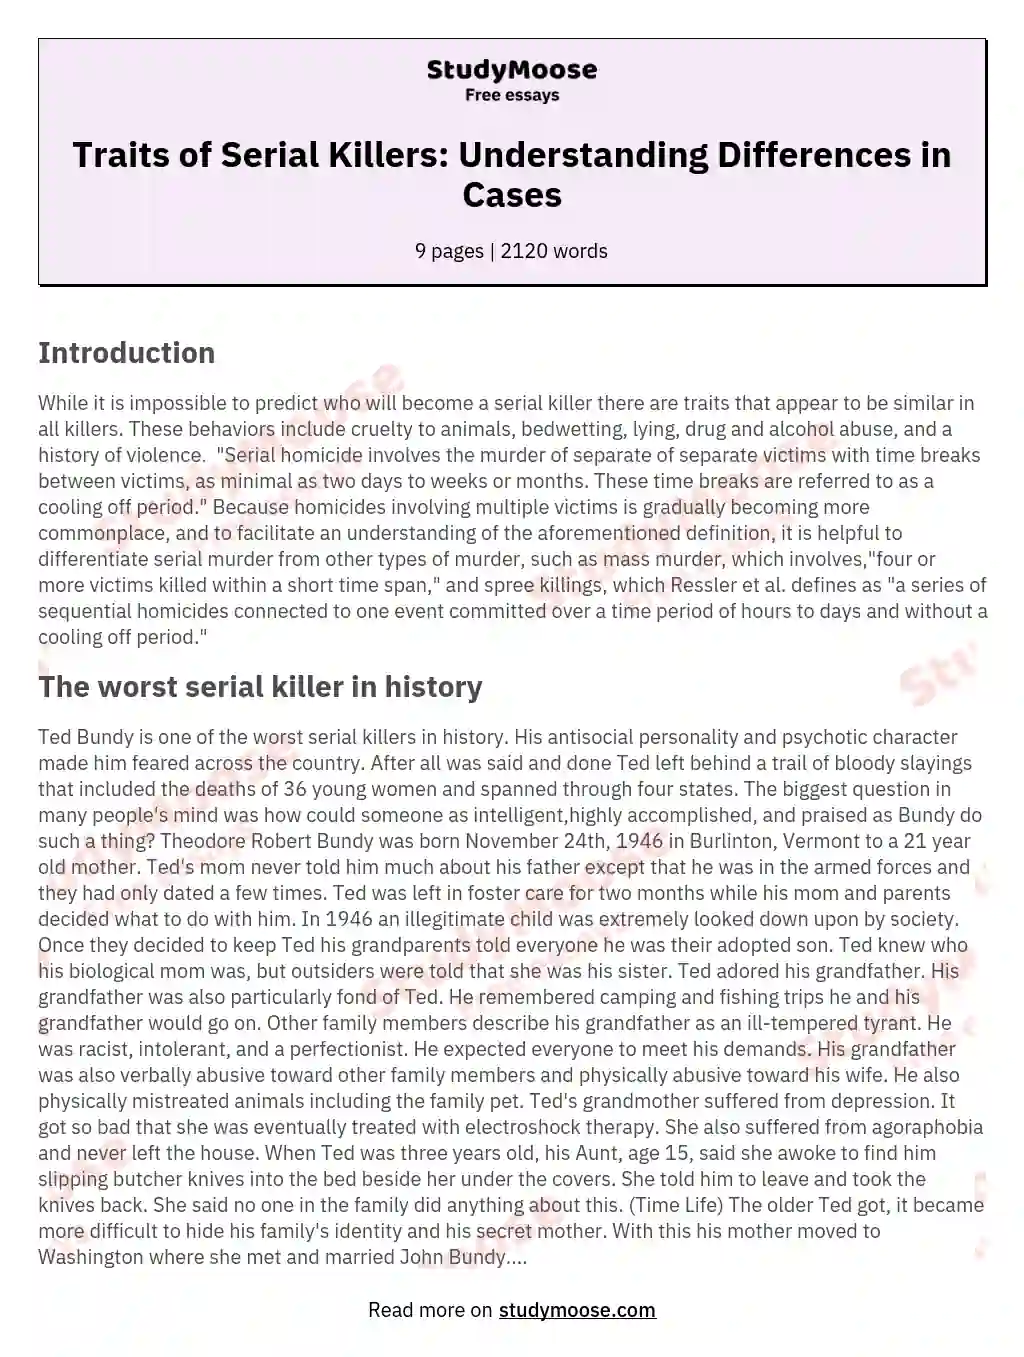 Traits of Serial Killers: Understanding Differences in Cases essay